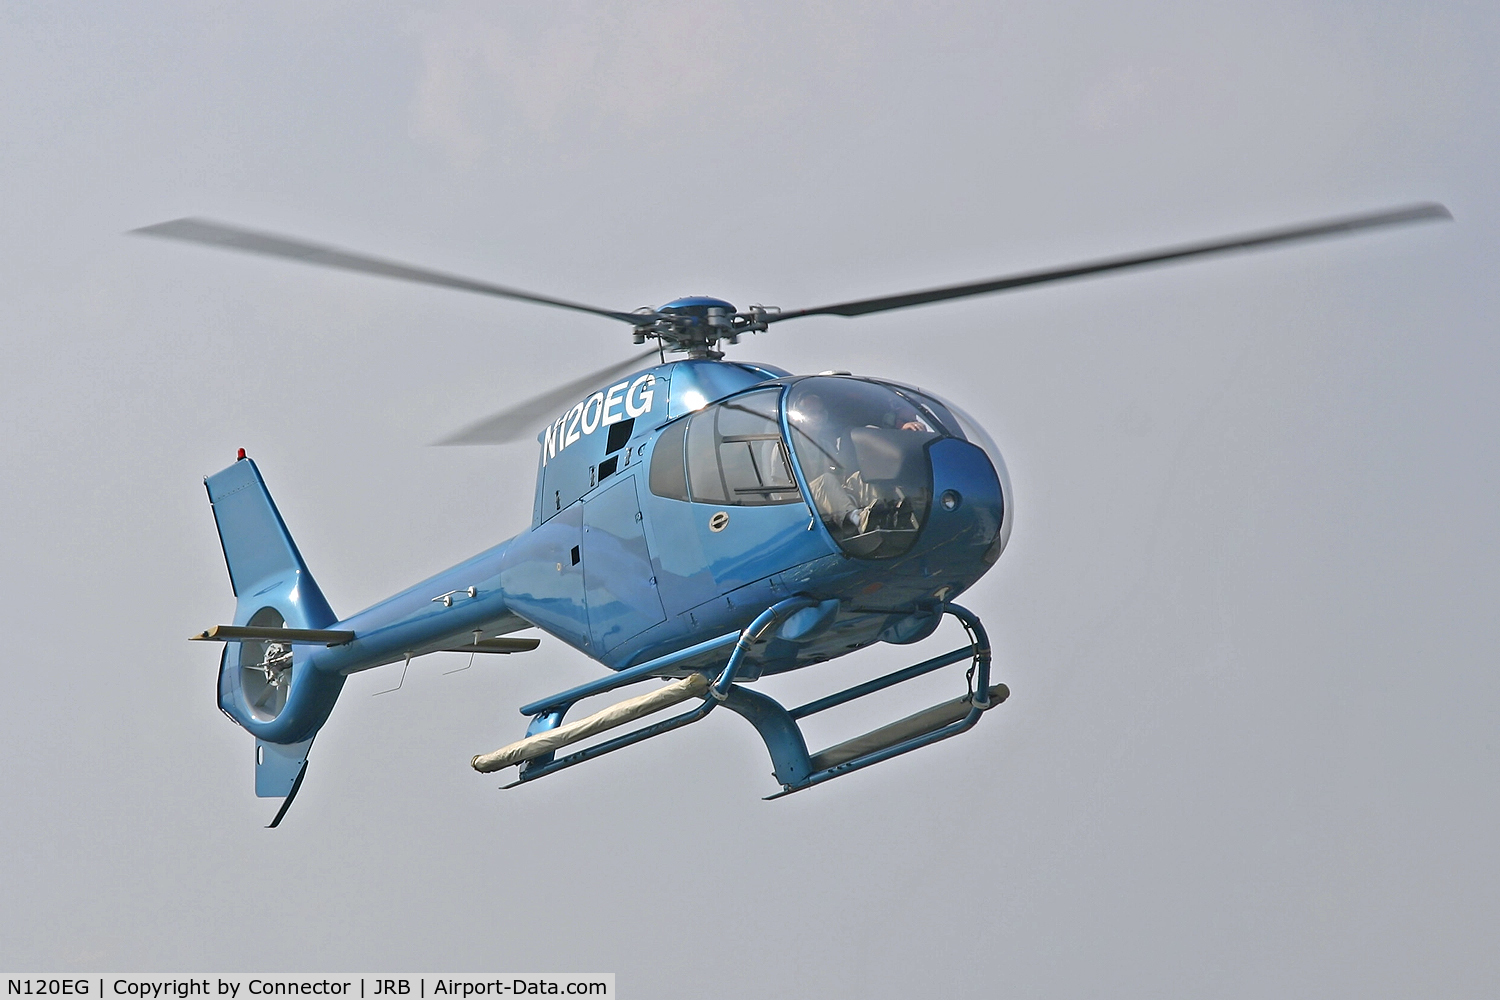 N120EG, 2001 Eurocopter EC-120B Colibri C/N 1195, Picture was taken during the shooting of a Nicolas Cage movie.